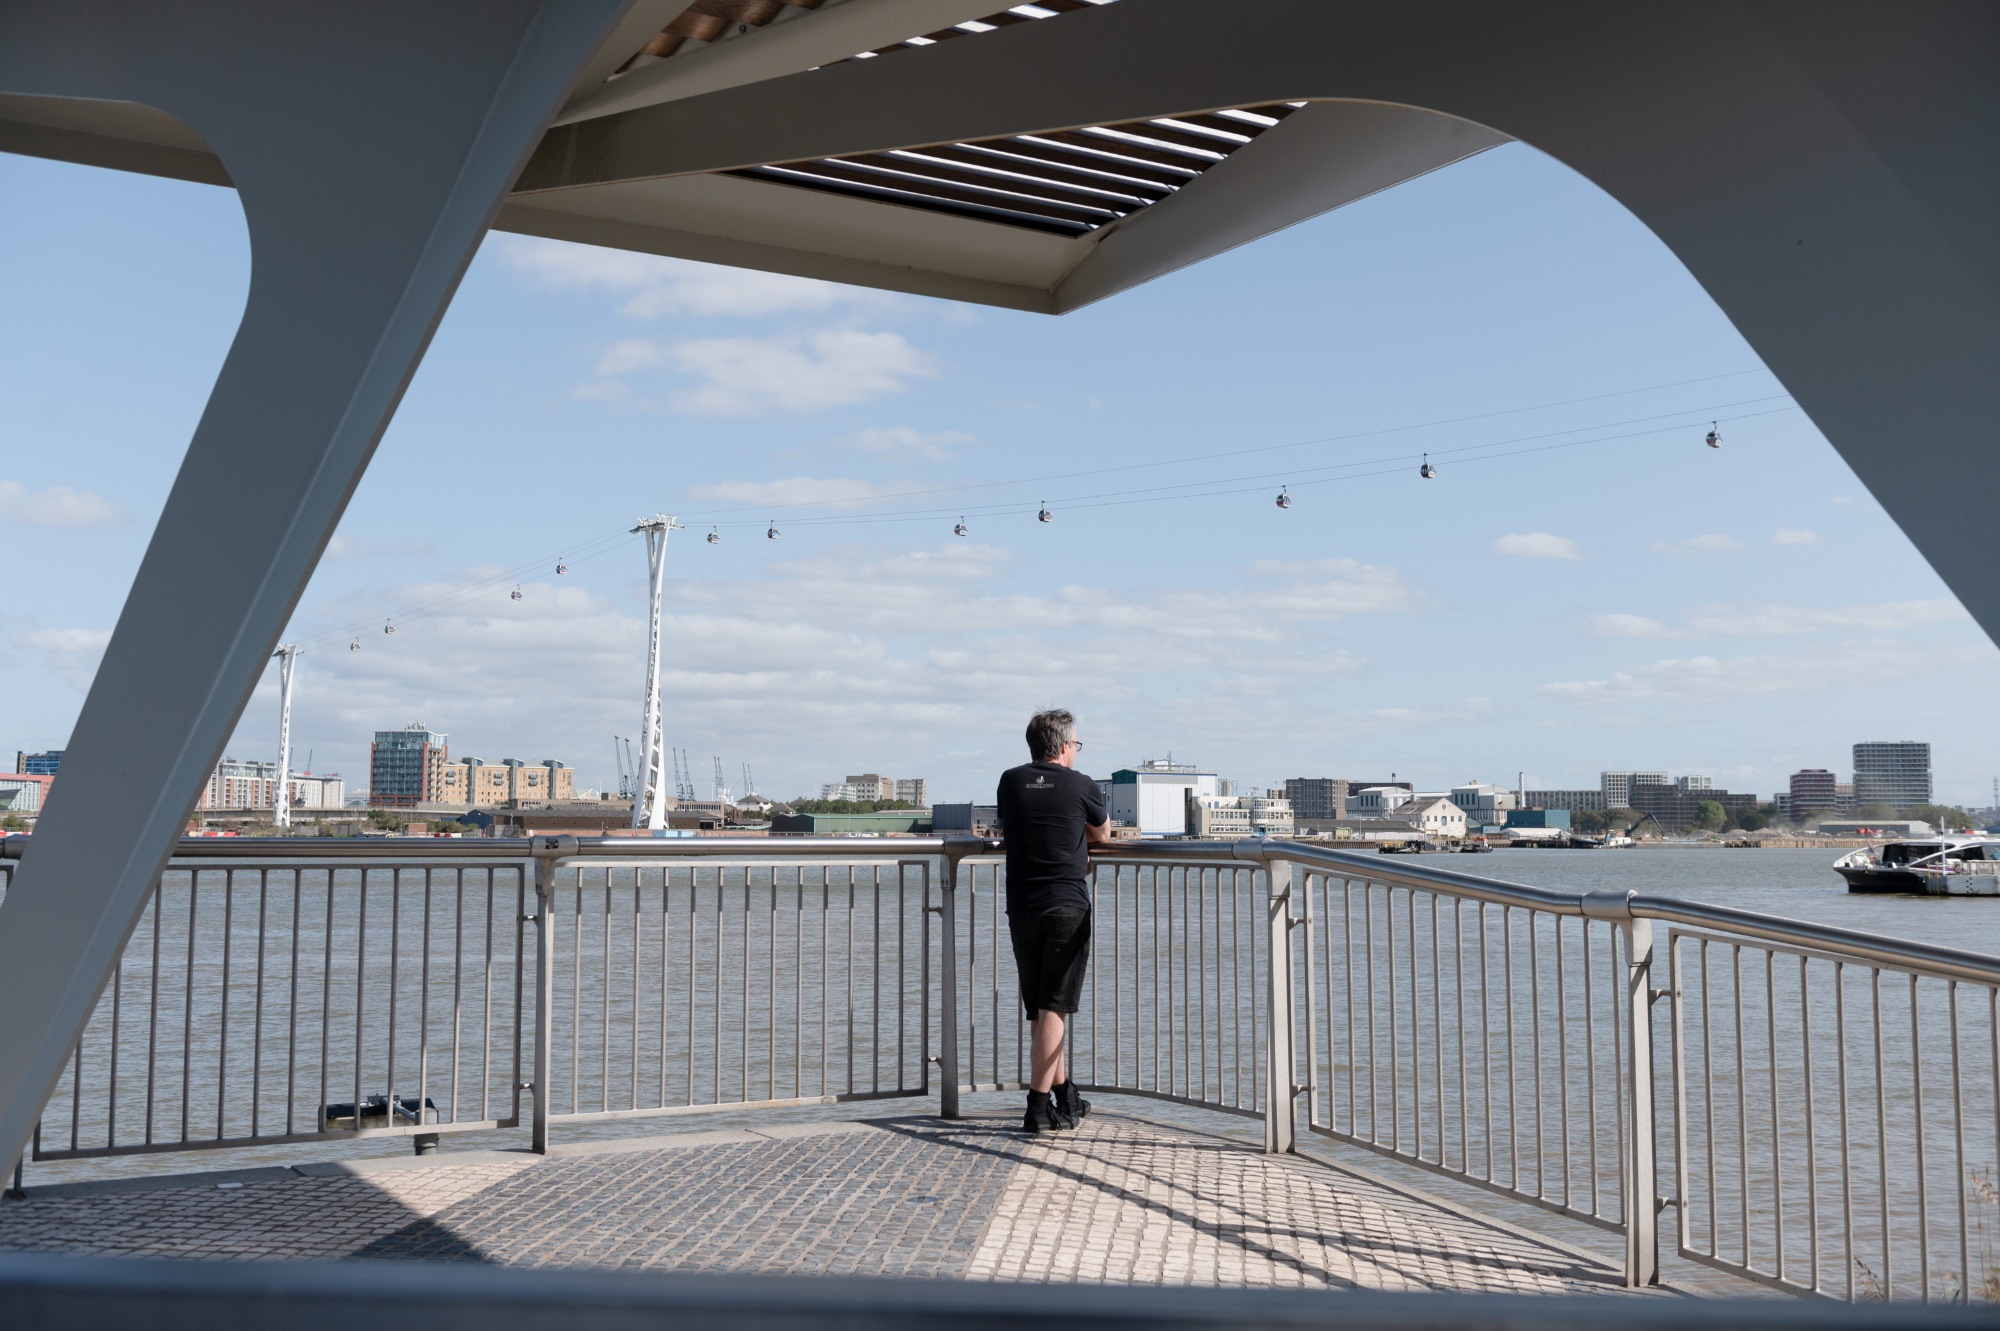 Man looking out at the river from a covered platform, with the cable car in view